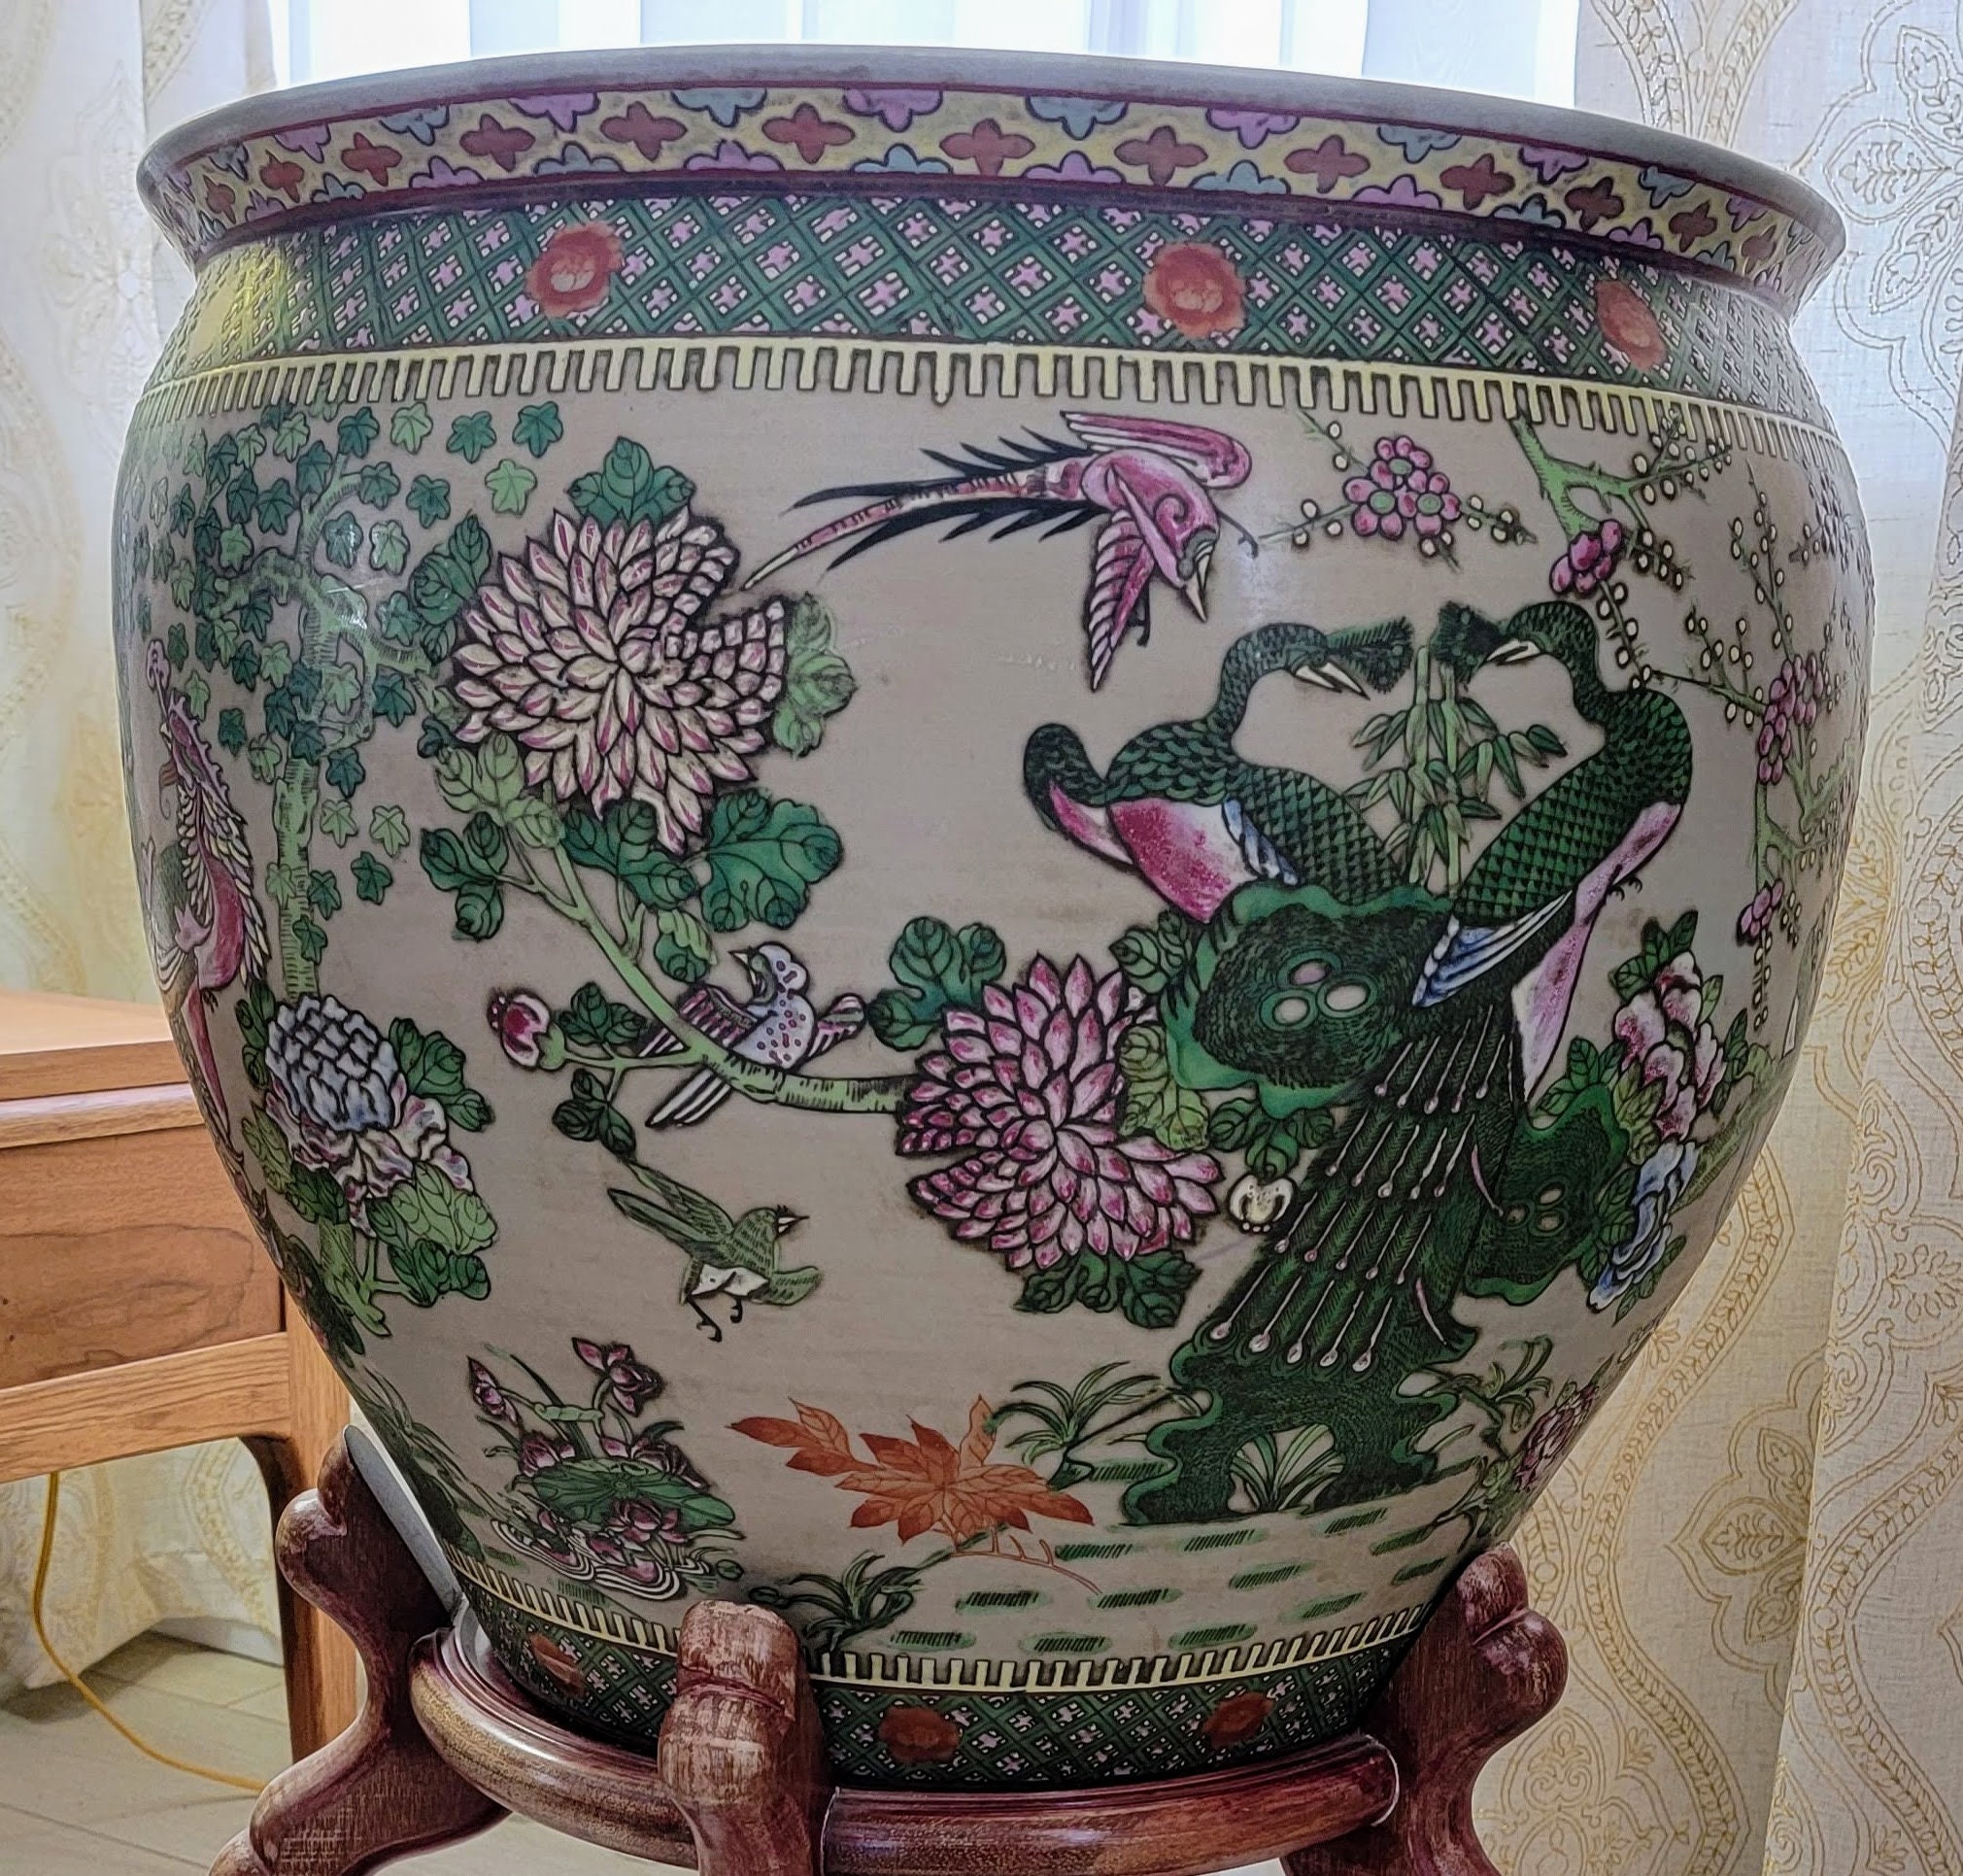 Buy Chinese Fish Bowl Planter Pot On Stand Giant 72 Online, 60% OFF